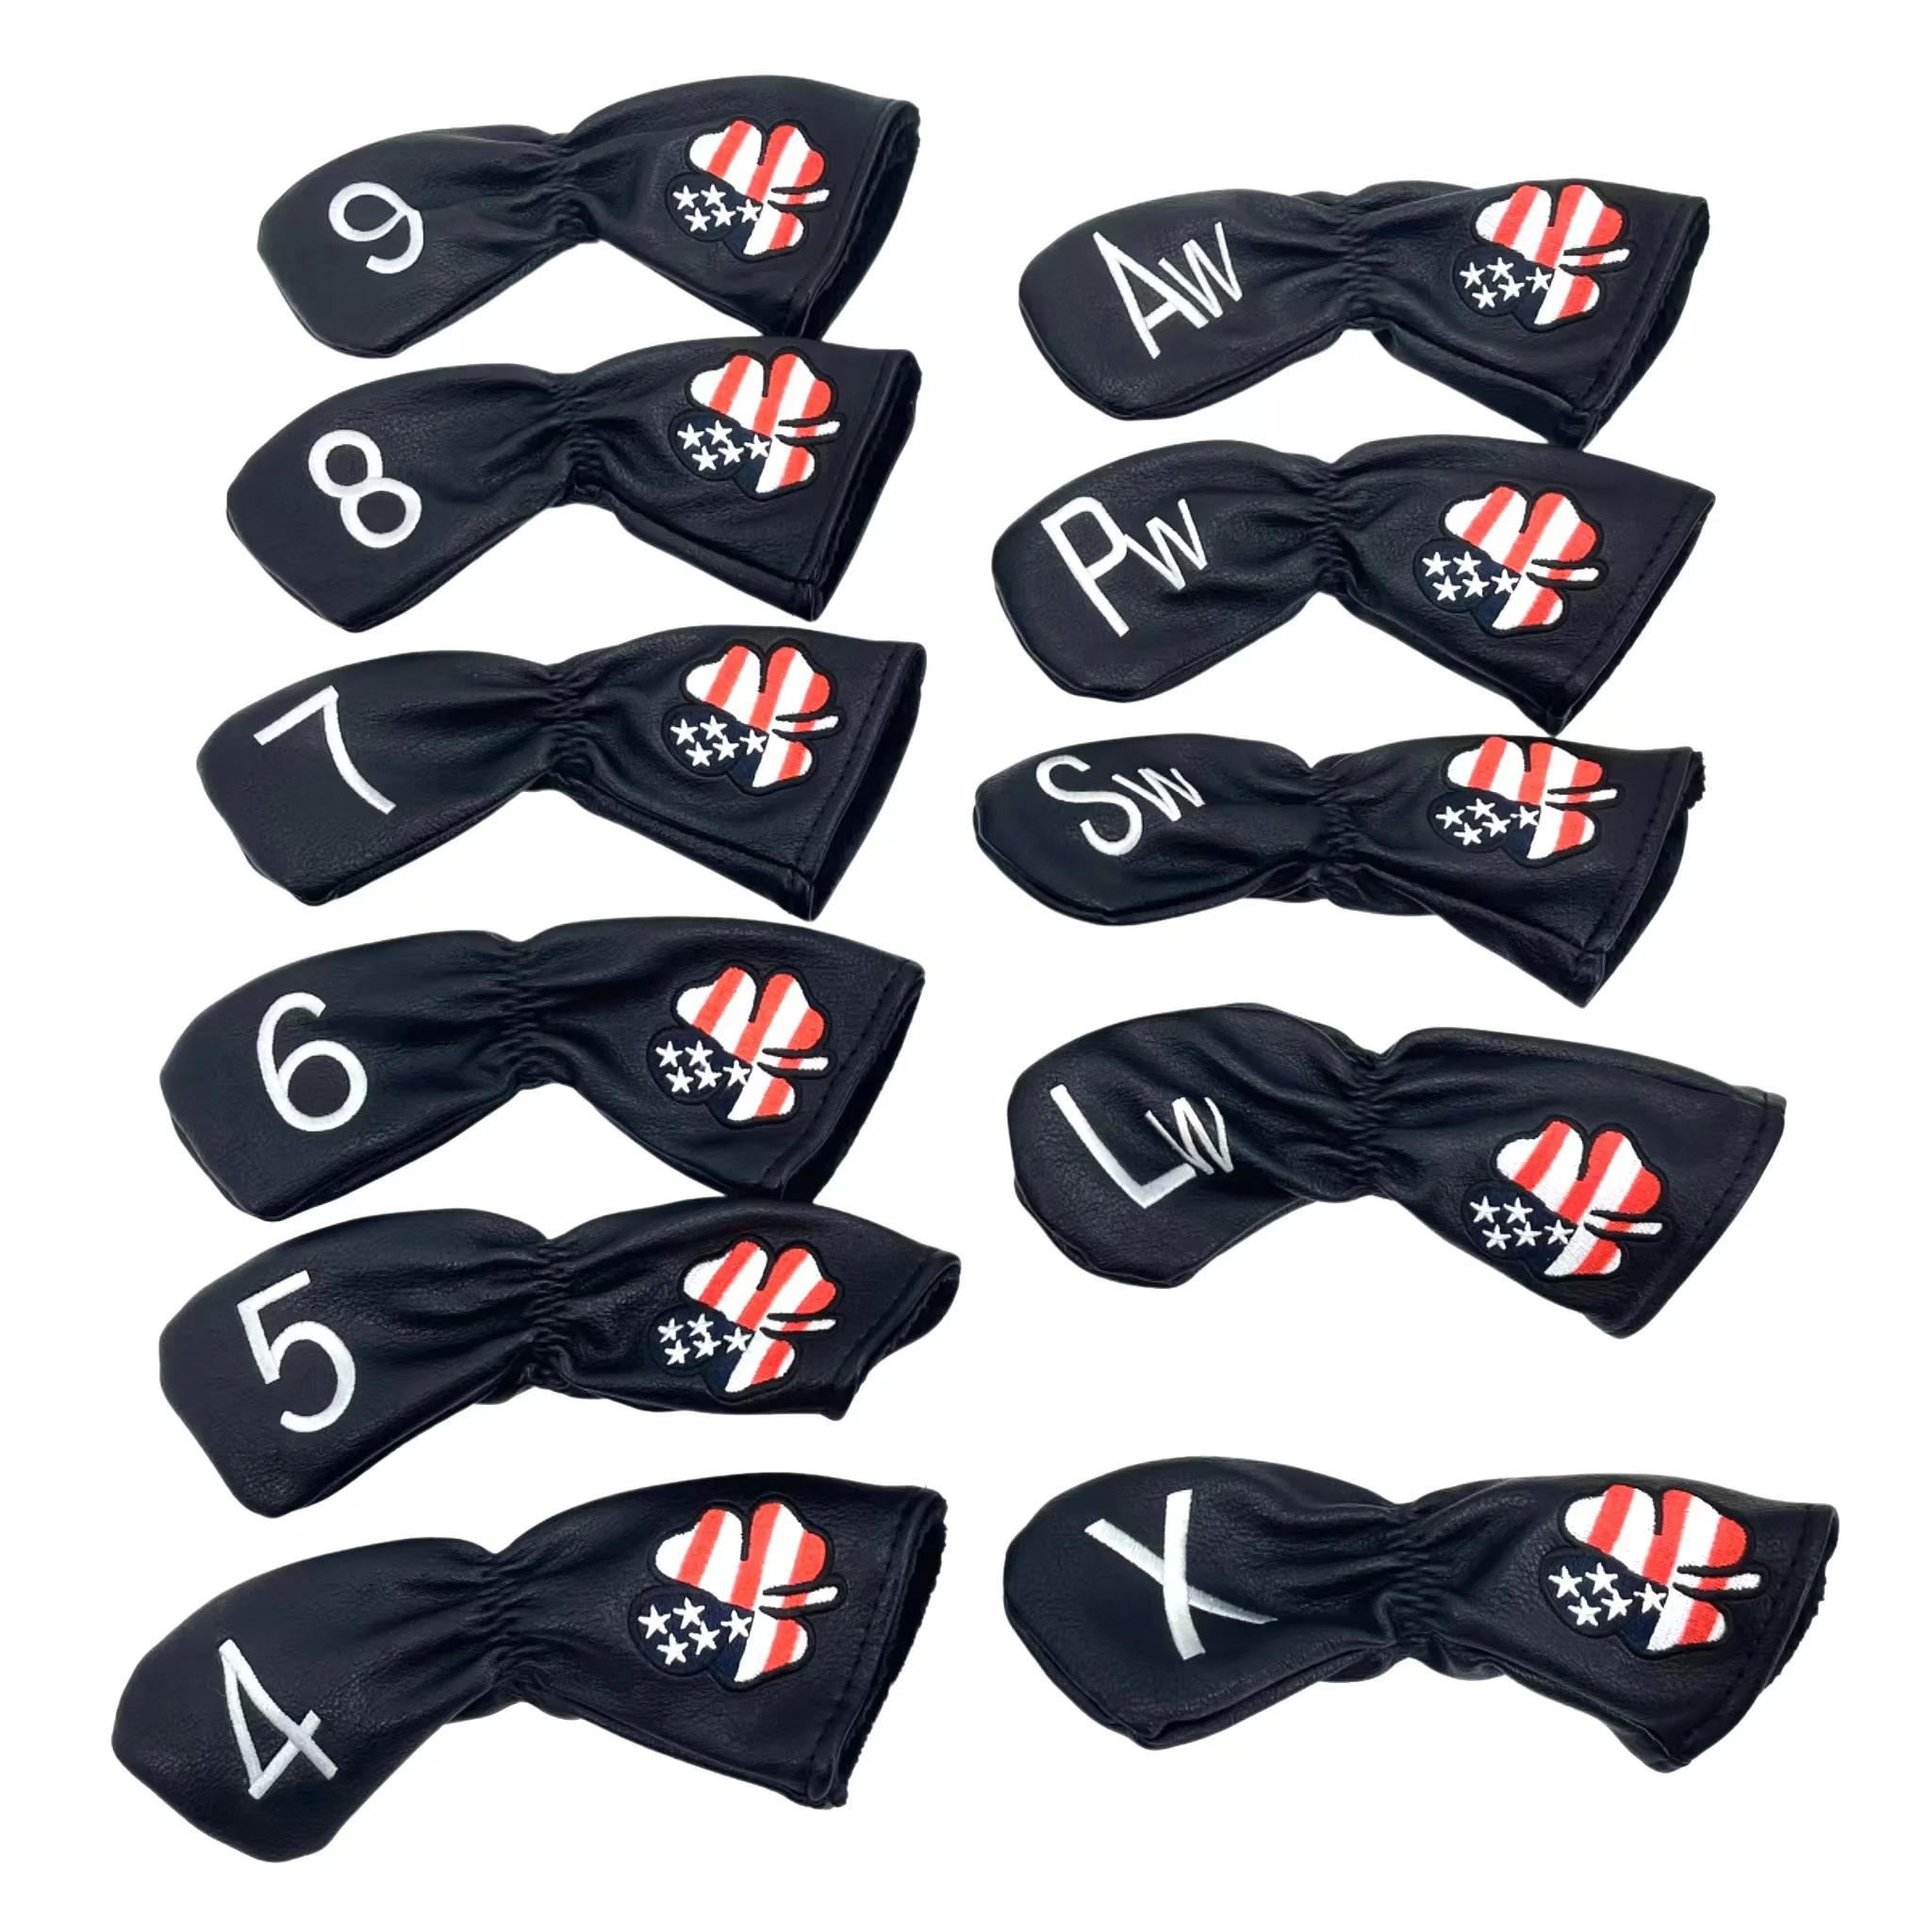 

11Pcs Soft PU Leather Golf Lucky Clover Irons Head cover Club Iron Head Covers with Number Printed 4,5,6,7,8,9,Aw,Sw,Pw,Lw,X.